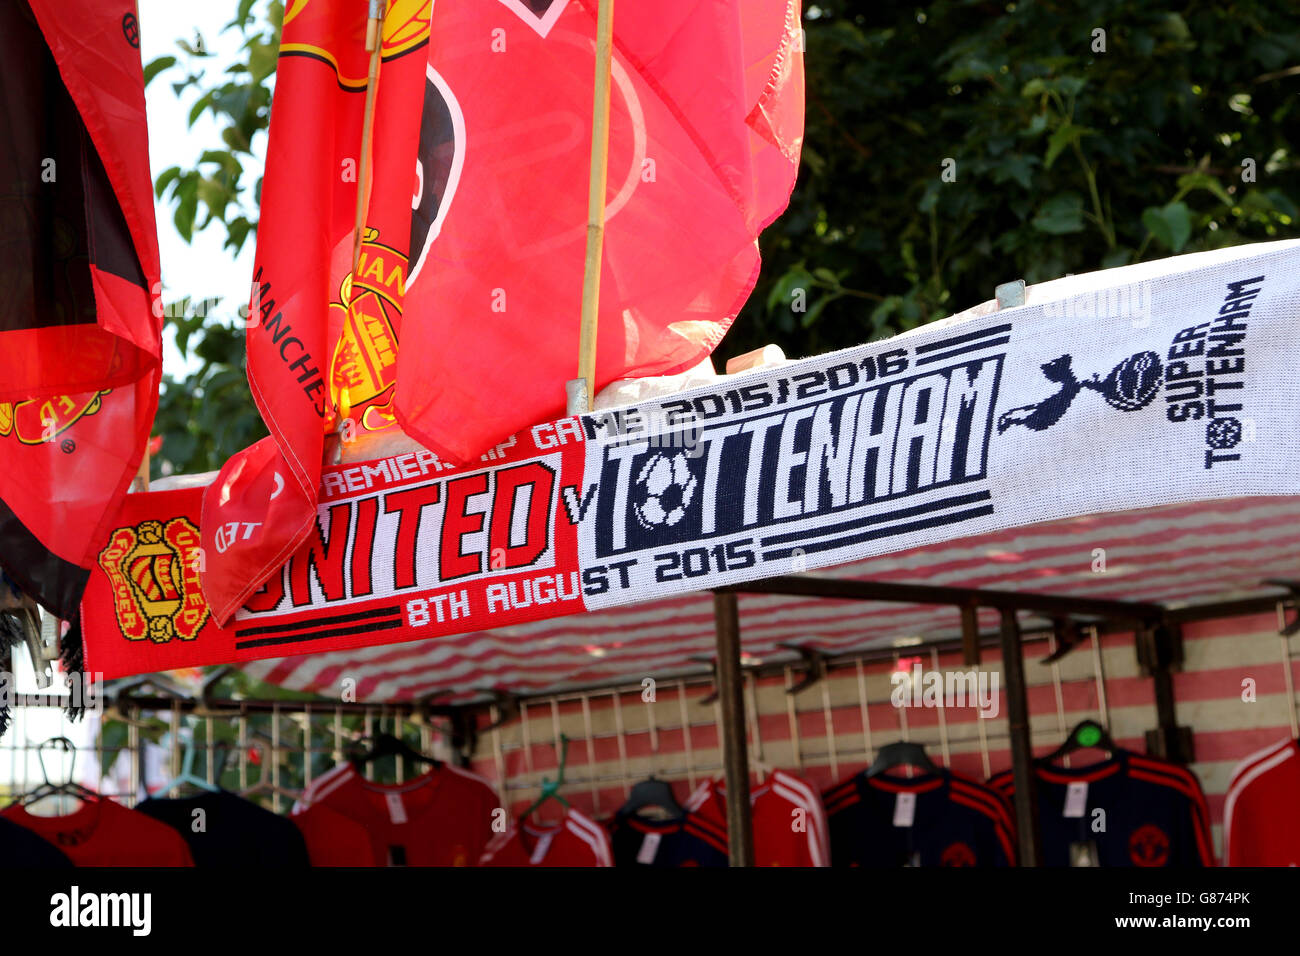 Soccer - Barclays Premier League - Manchester United v Tottenham Hotspur -  Old Trafford. Manchester United versus Spurs match day scarves on sale  Stock Photo - Alamy